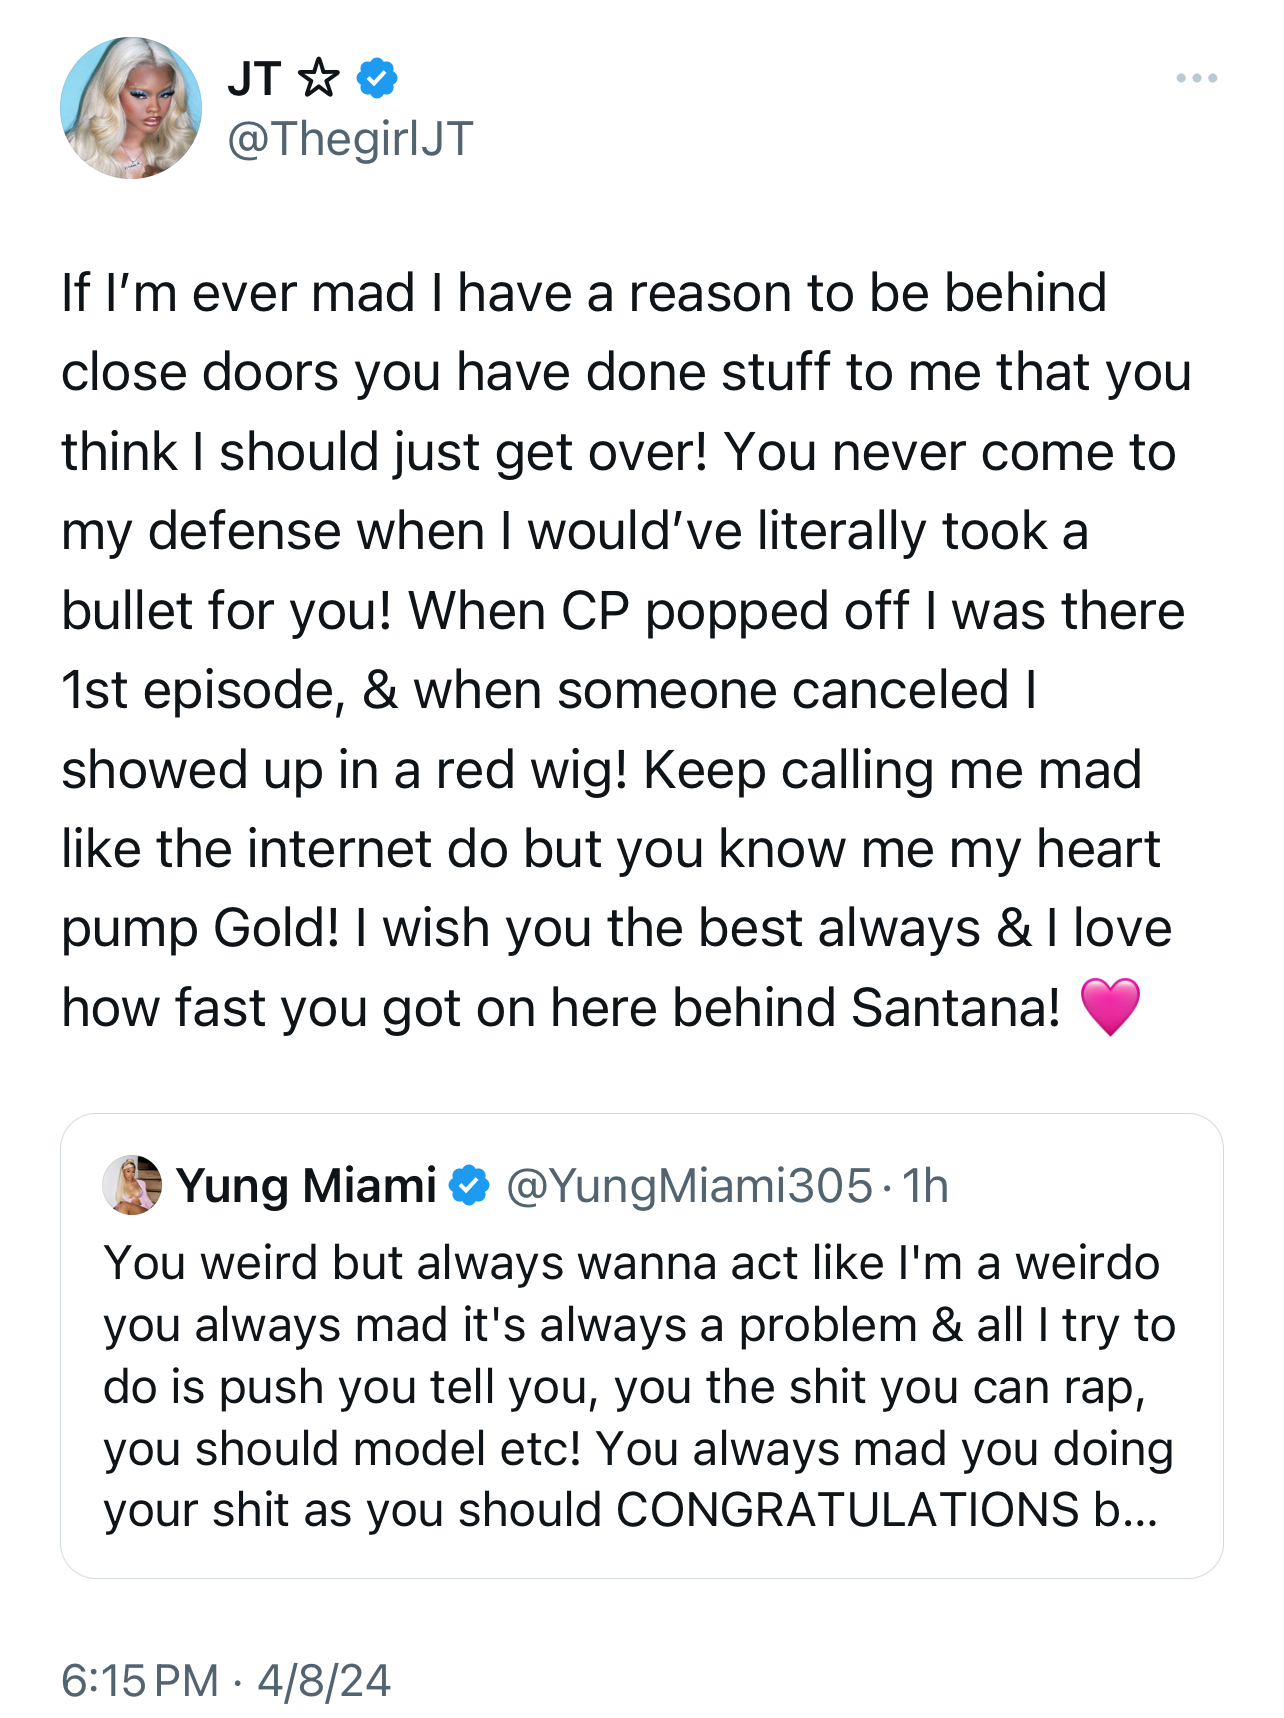 A screenshot of tweets by @ThegirlJT and @YungMiami305 discussing personal resilience, support, and congratulations on achievements